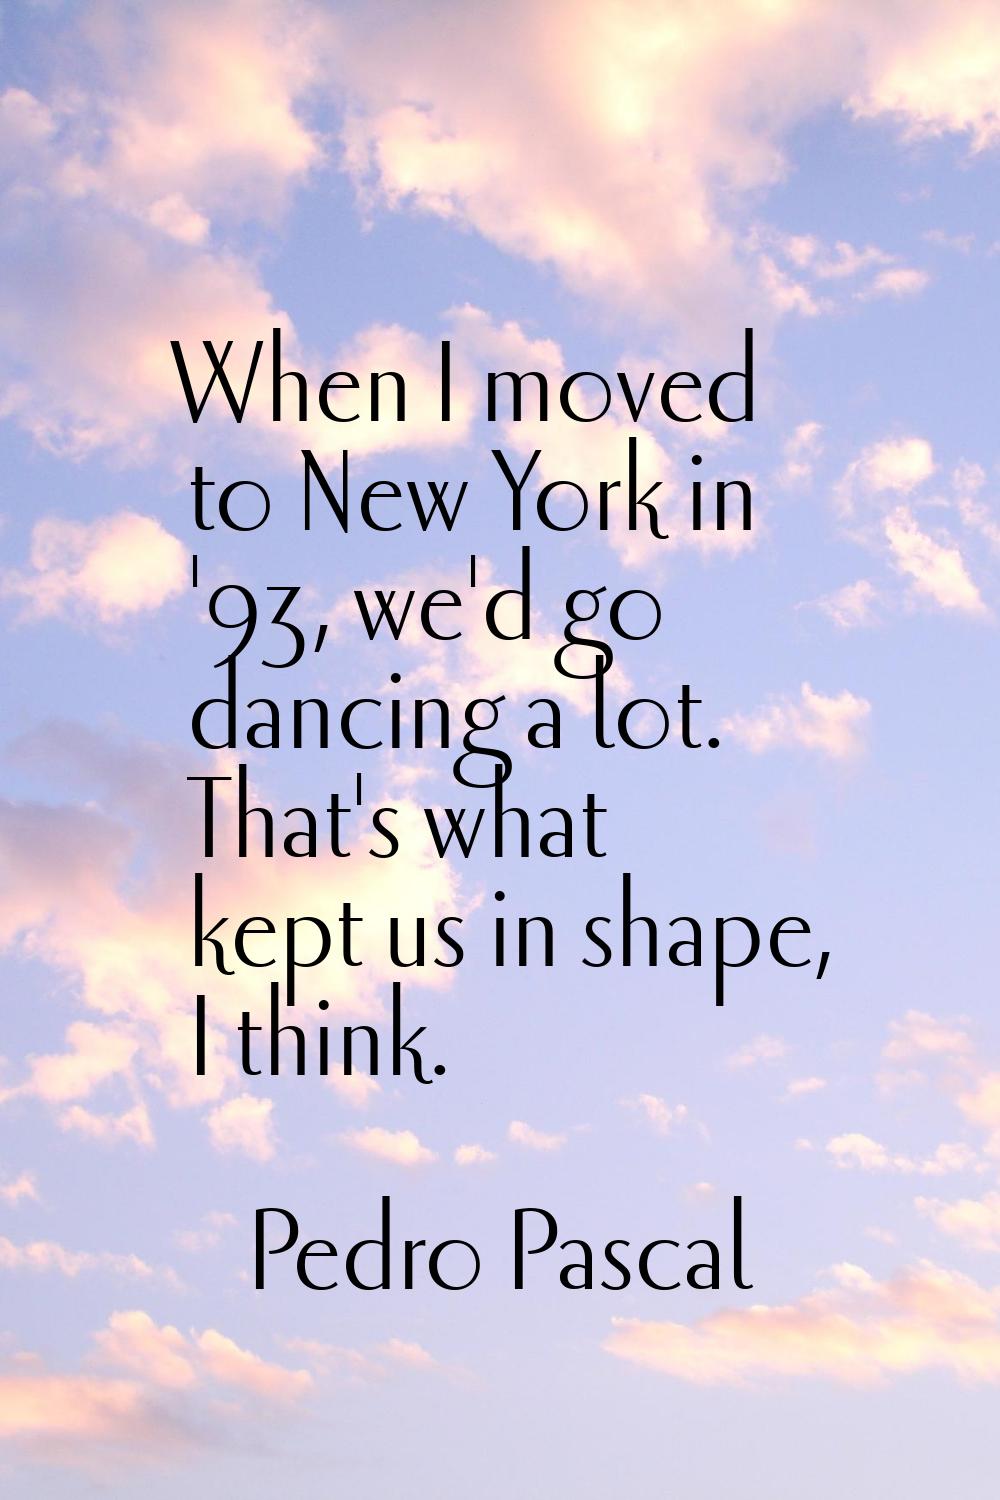 When I moved to New York in '93, we'd go dancing a lot. That's what kept us in shape, I think.